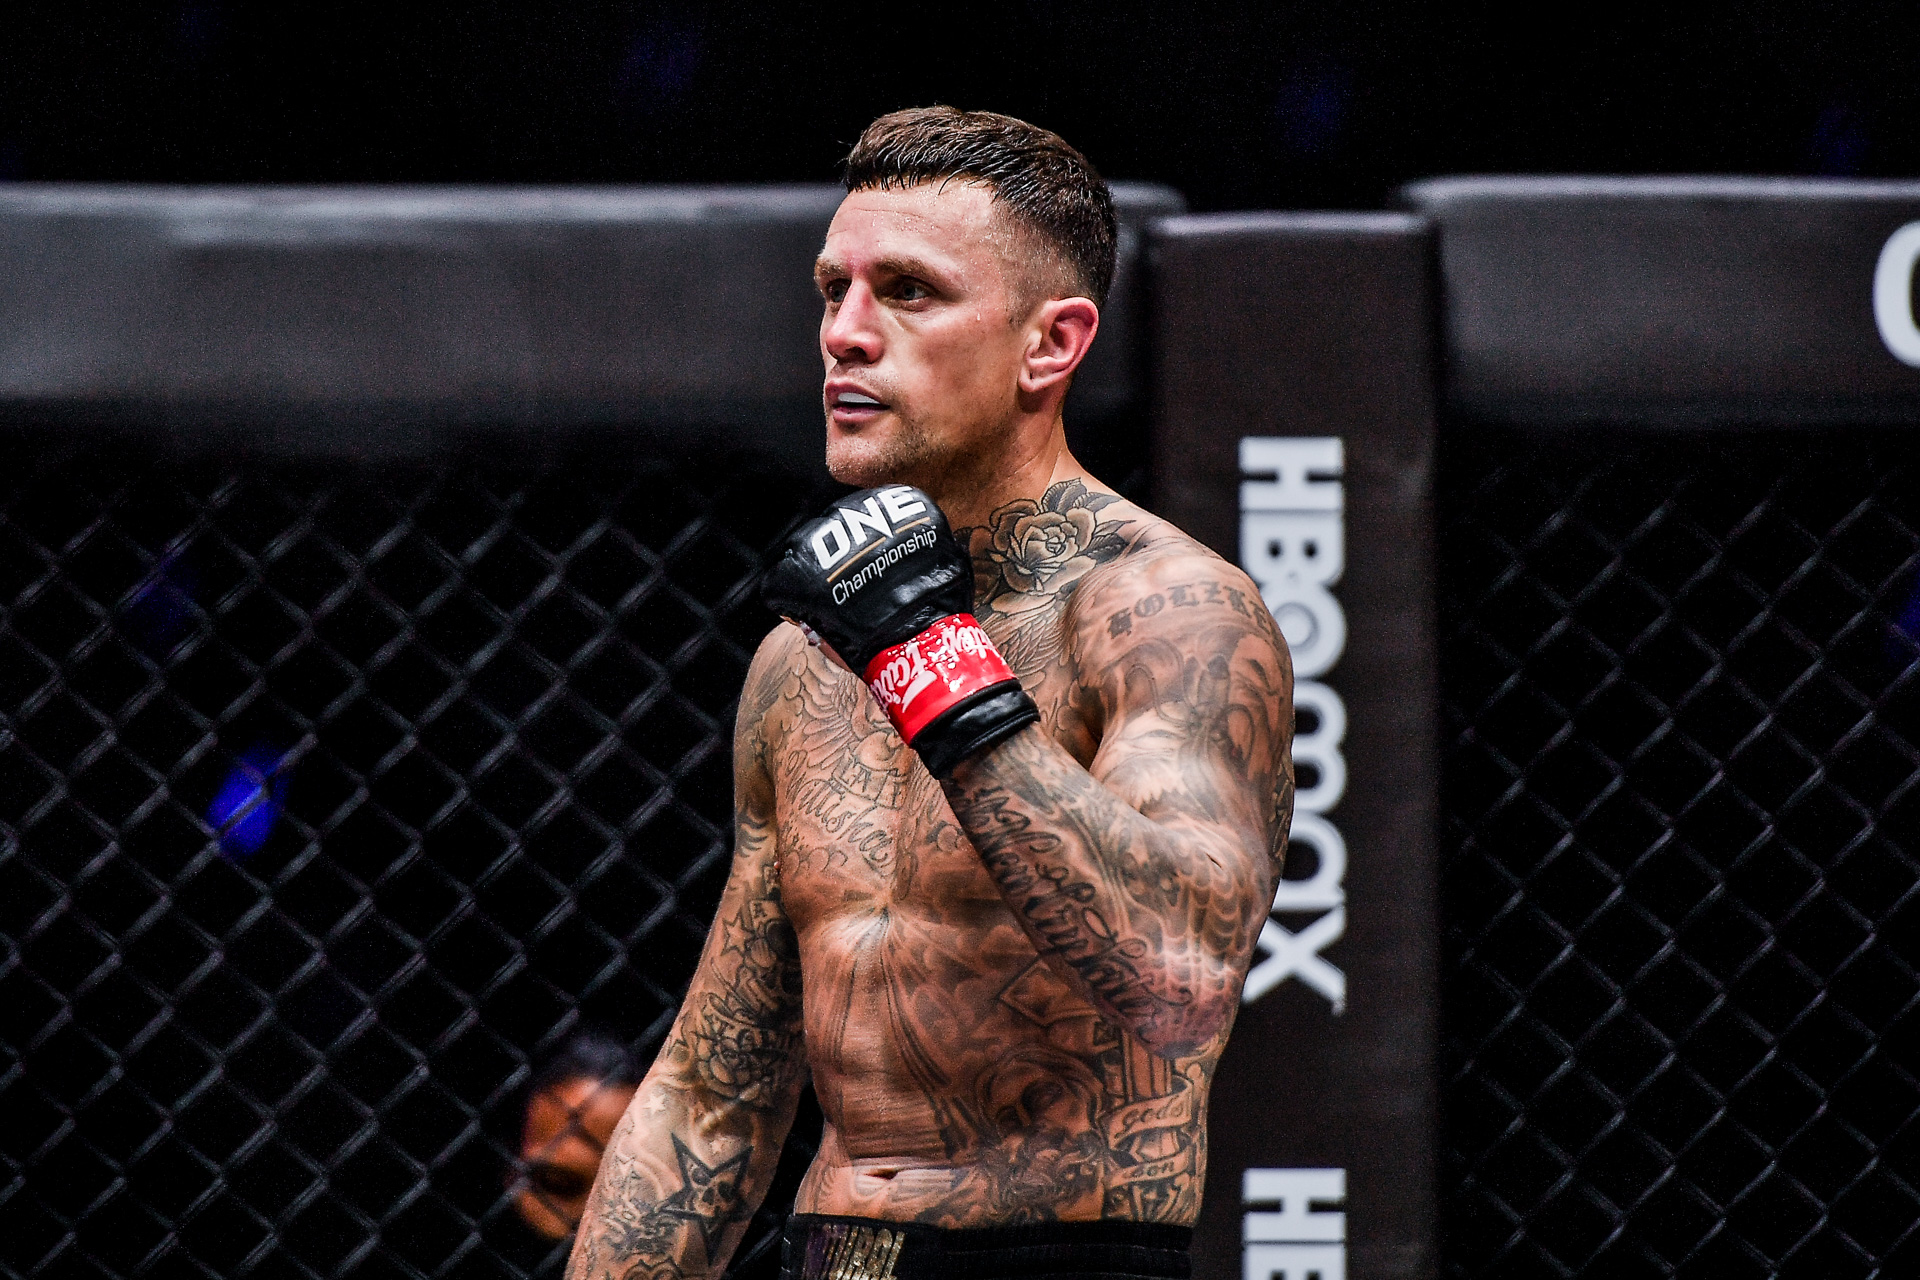 Nieky Holzken is set for Muay Thai action